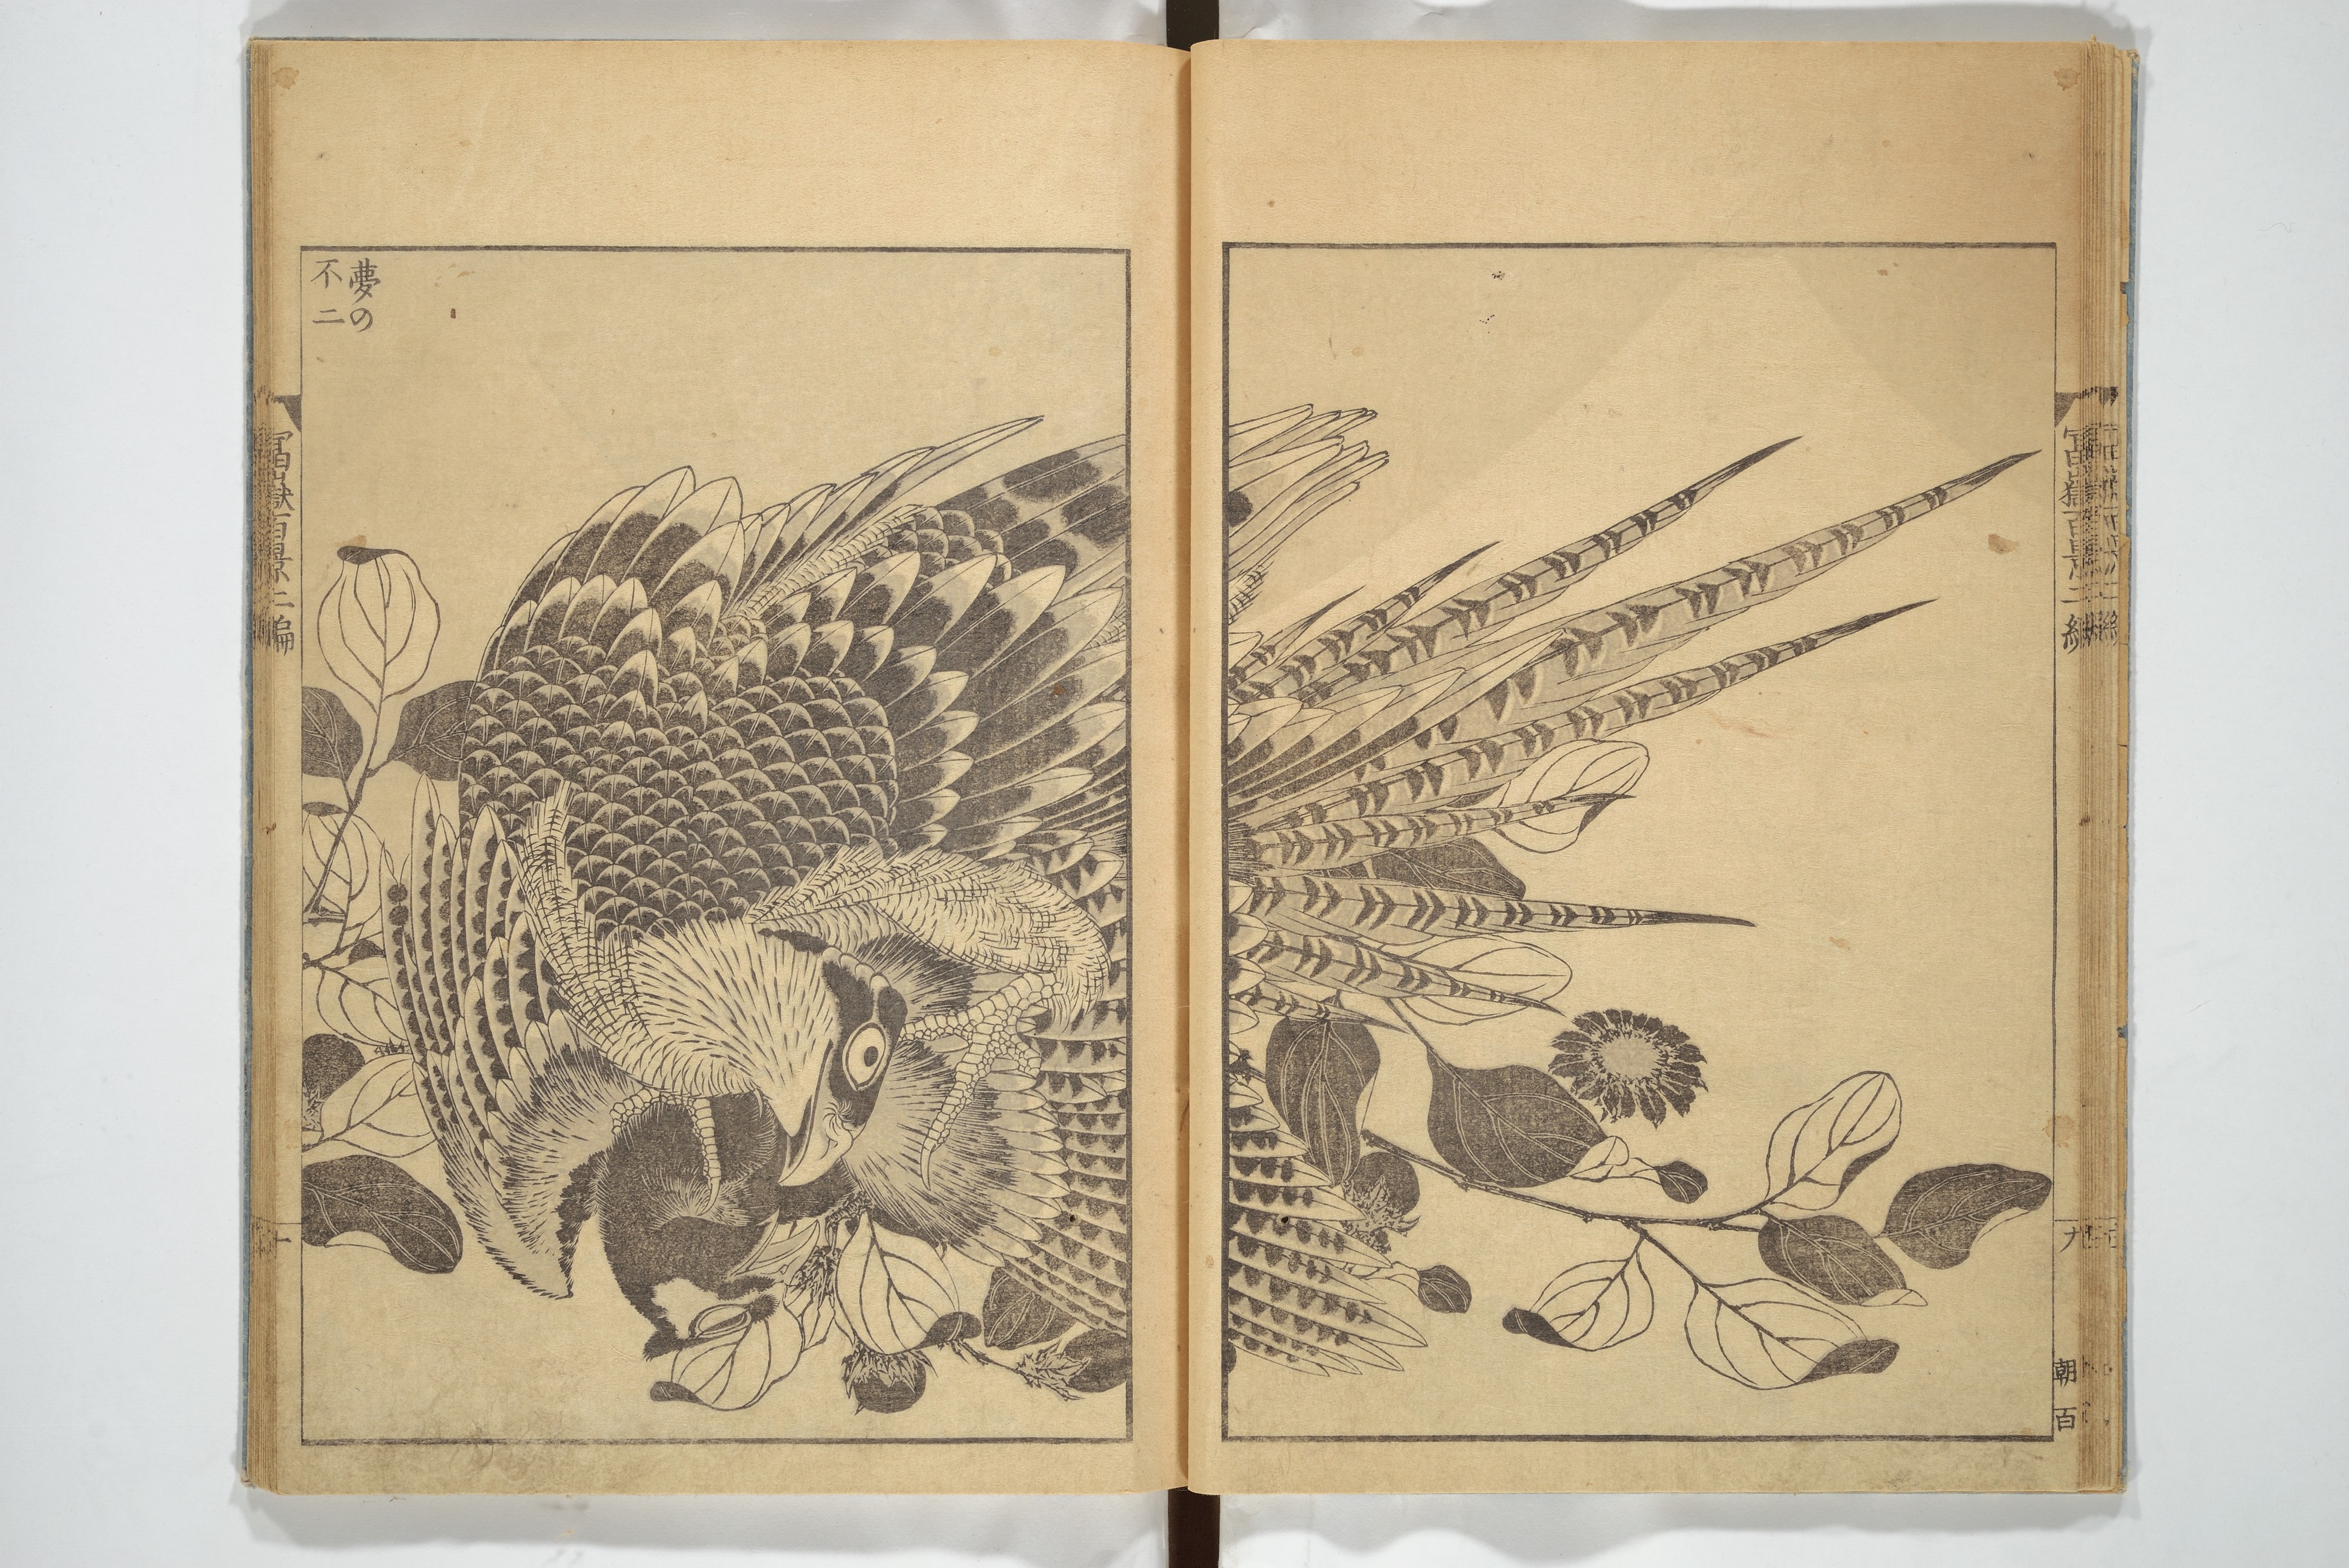 The Met Puts 650+ Japanese Illustrated Books Online: Marvel at Hokusai's  One Hundred Views of Mount Fuji and More